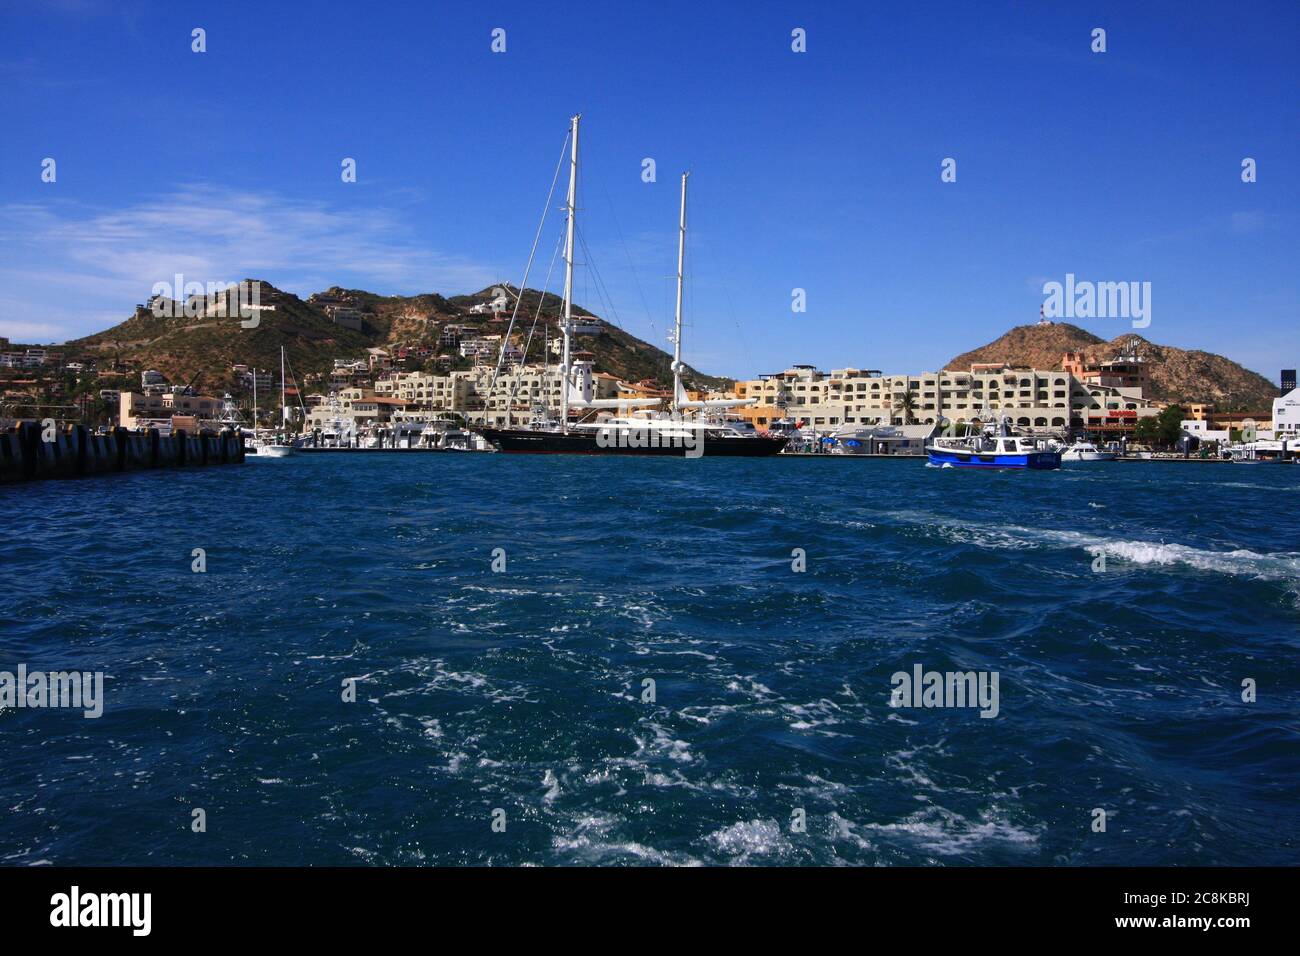 Fun vacation on a cruise ship, at port of call with sailboat. Stock Photo